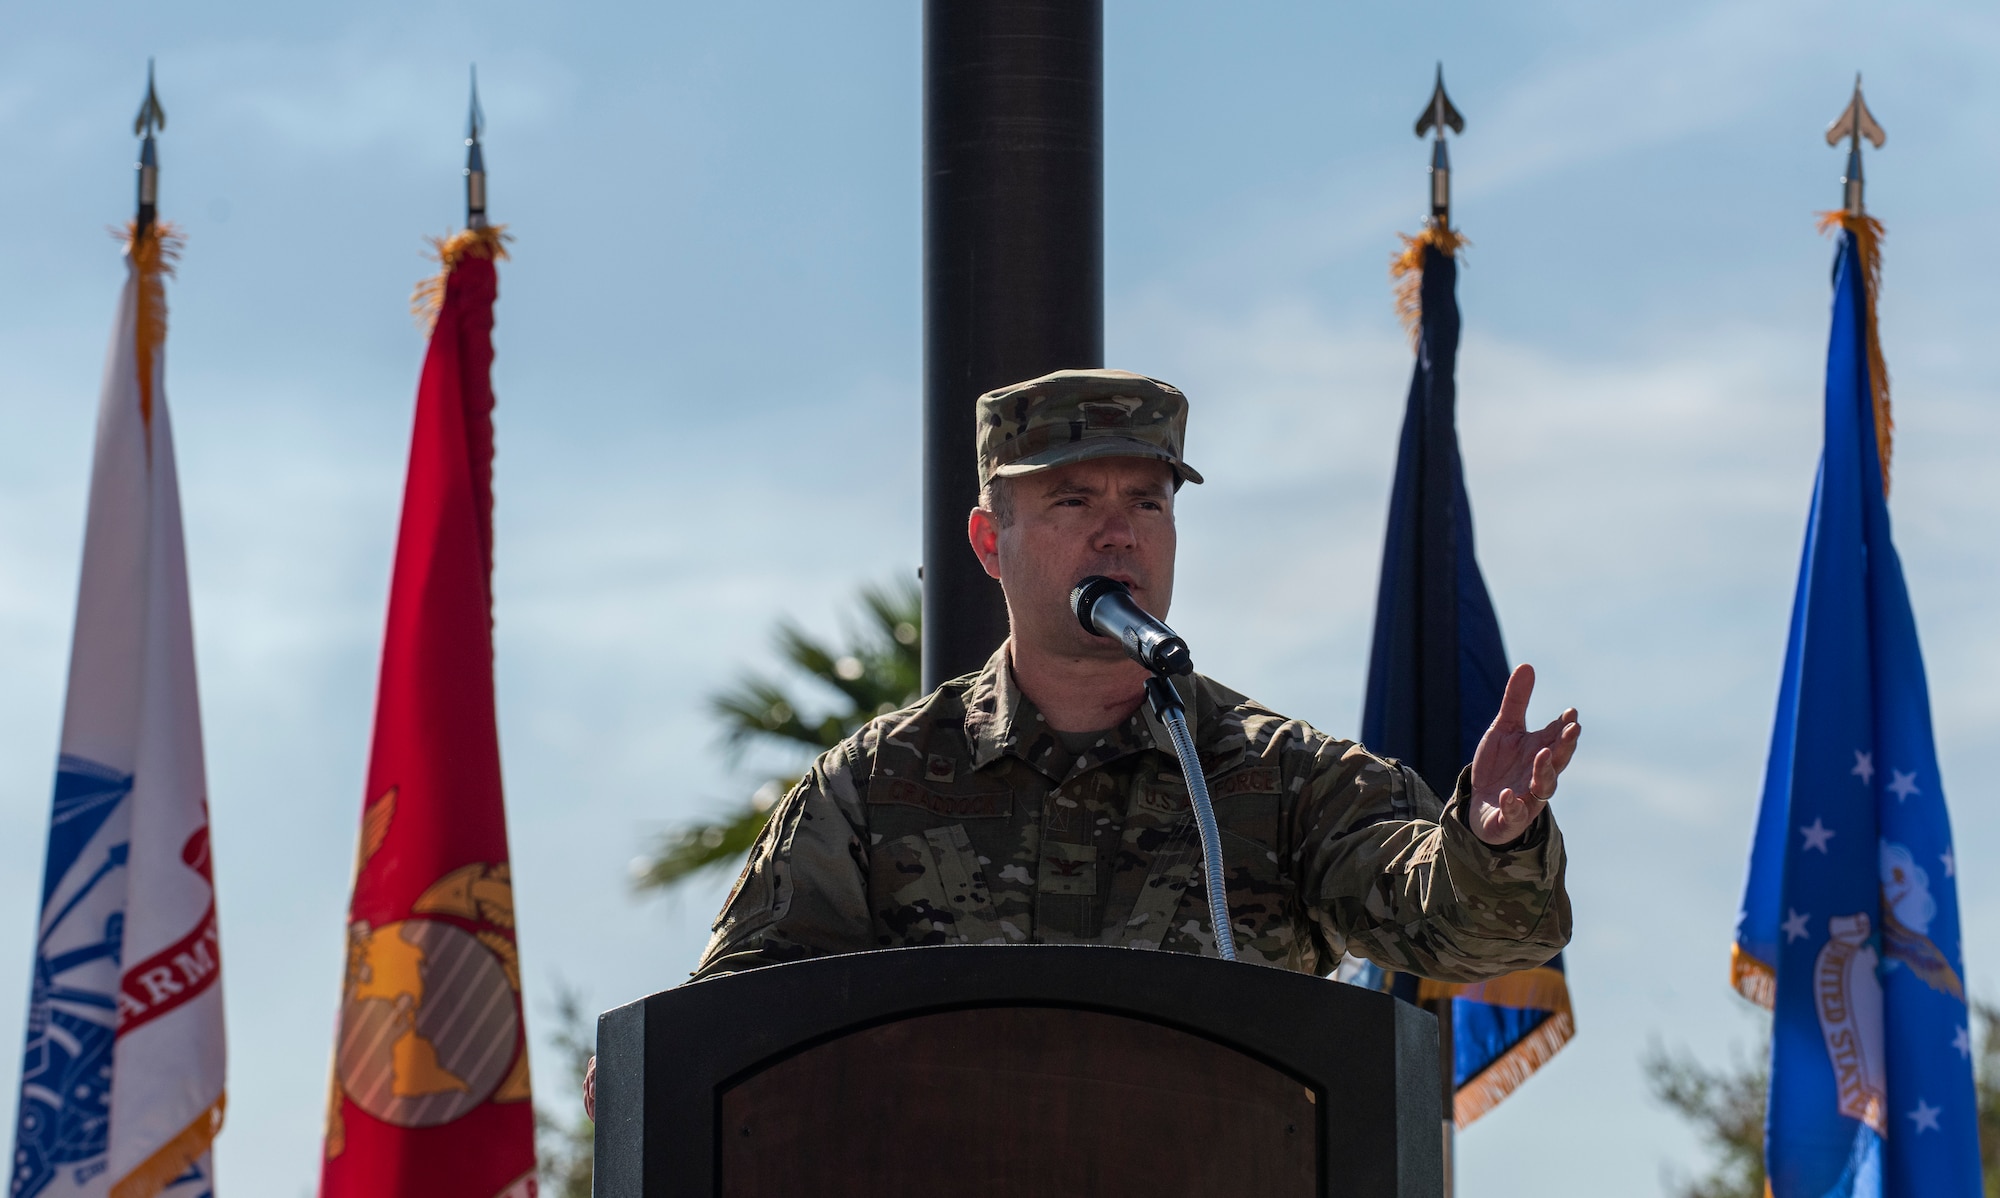 Col. Cavan Craddock, 99th Air Base Wing commander, speaks during a ceremony celebrating the Mike O’Callaghan Military Medical Center’s 25th Anniversary at Nellis Air Force Base, Nevada, Nov. 12, 2019. The event served to not only commemorate O’Callaghan, but also as an official groundbreaking ceremony for a new wing of the hospital. (U.S. Air Force photo by Senior Airman Kevin Tanenbaum)